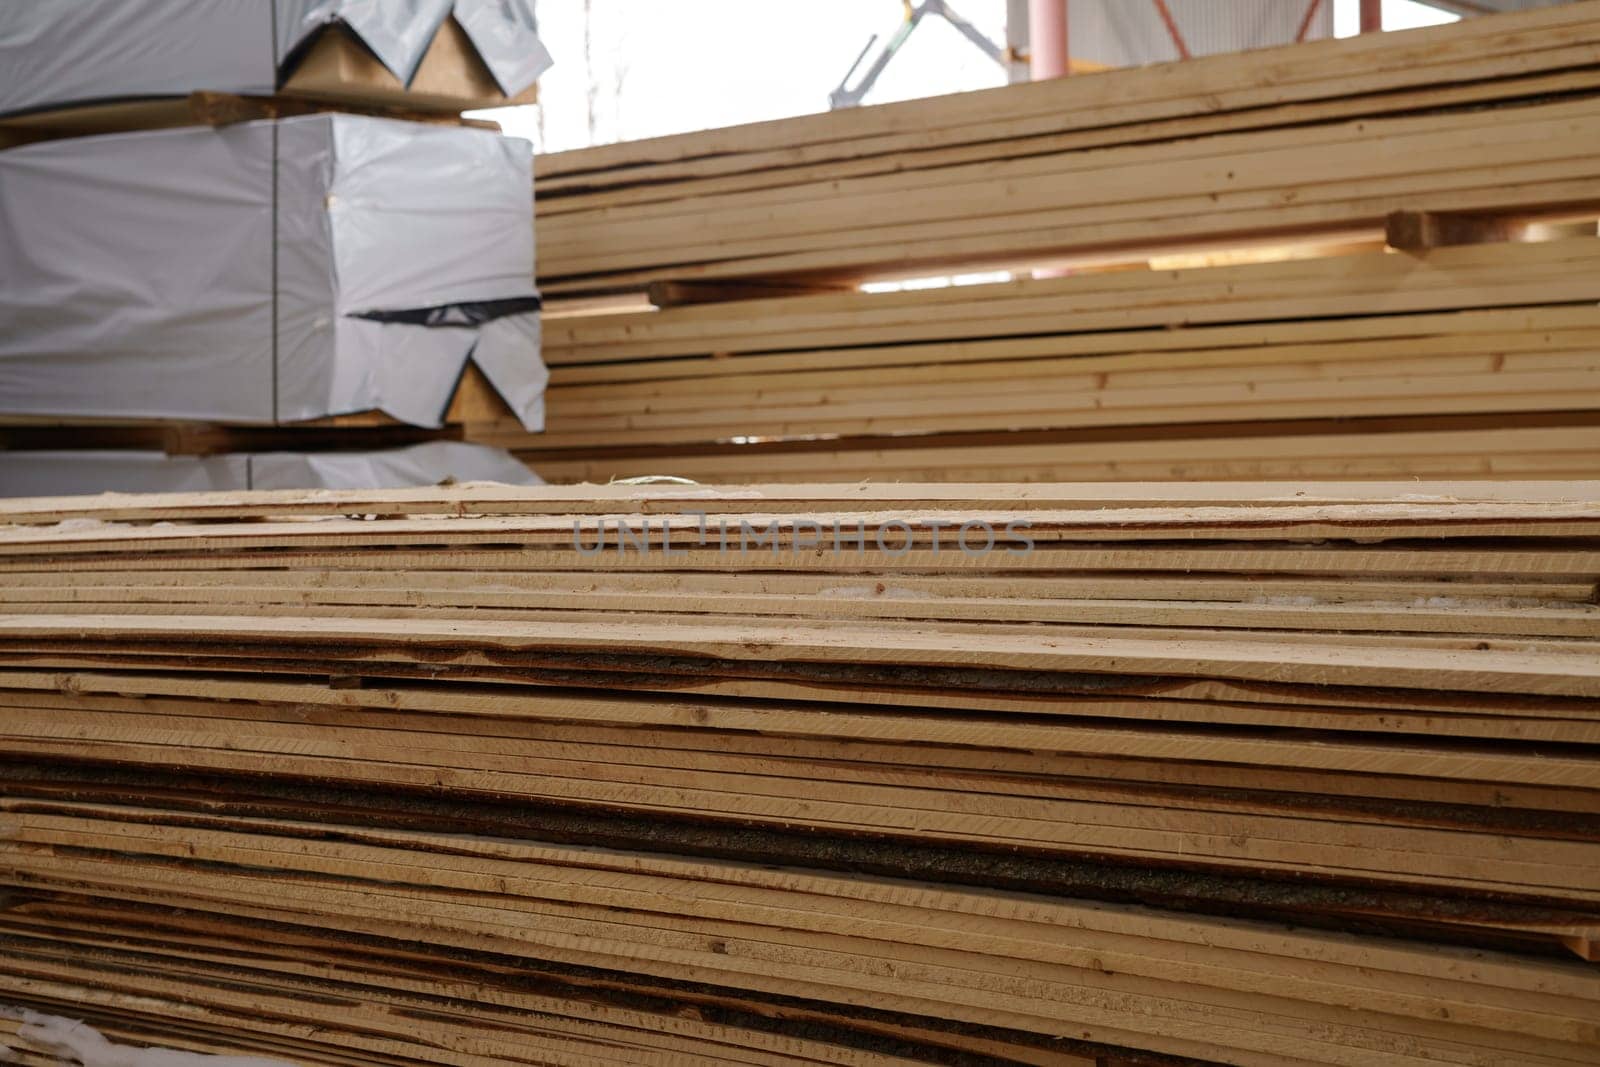 Image of wooden boards piled at sawmill by rivertime